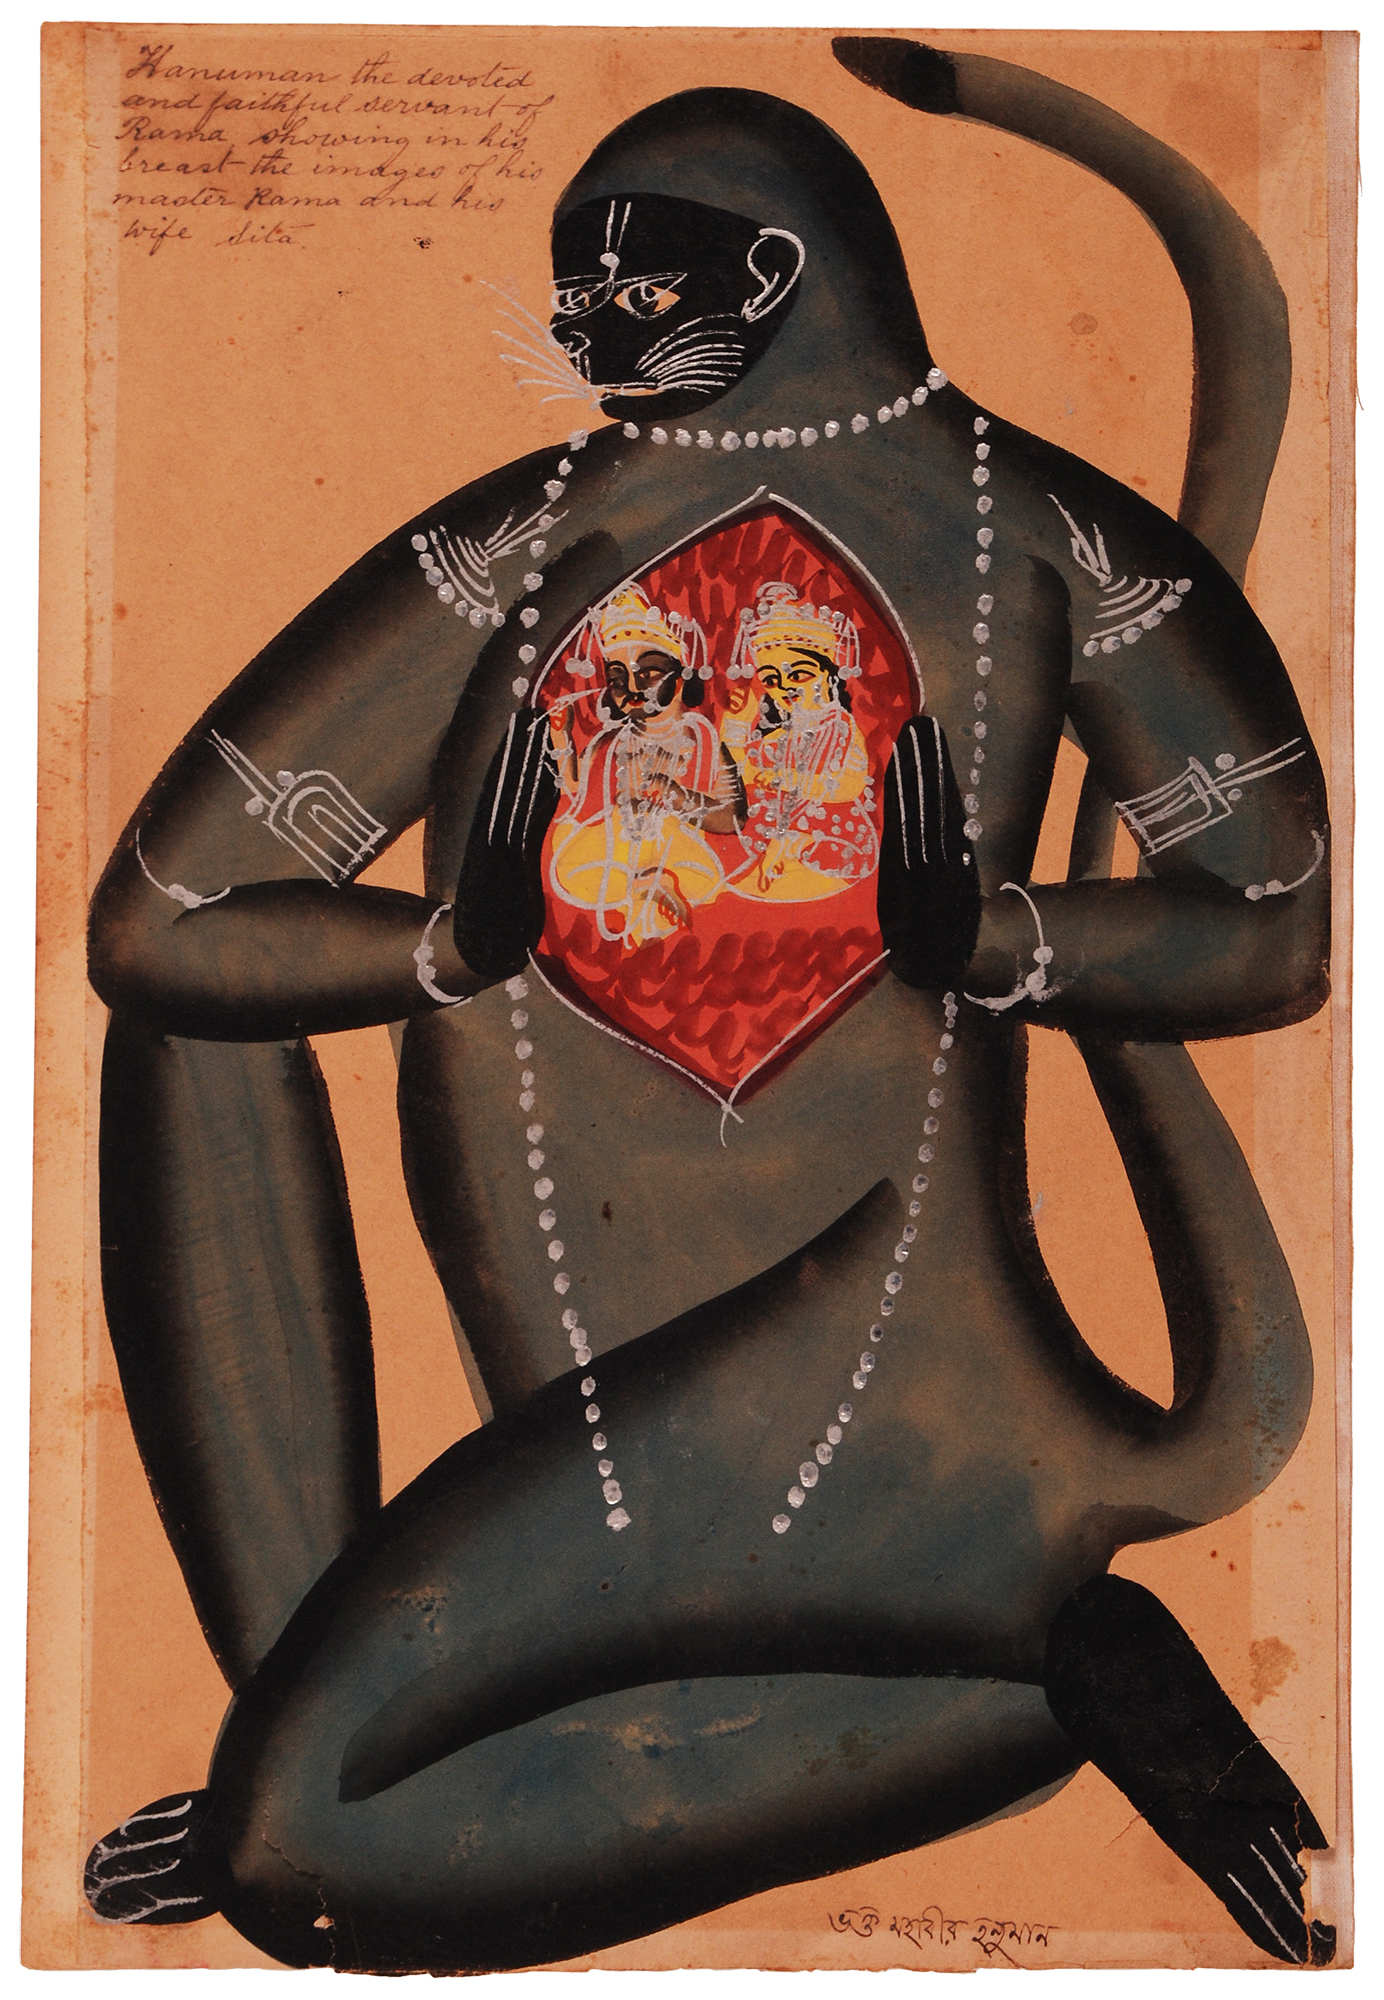 Painting of a human-animal hybrid figure with a cat's head and tail and human arms and legs, opening its torso to reveal a red interior with two small human figures seated inside